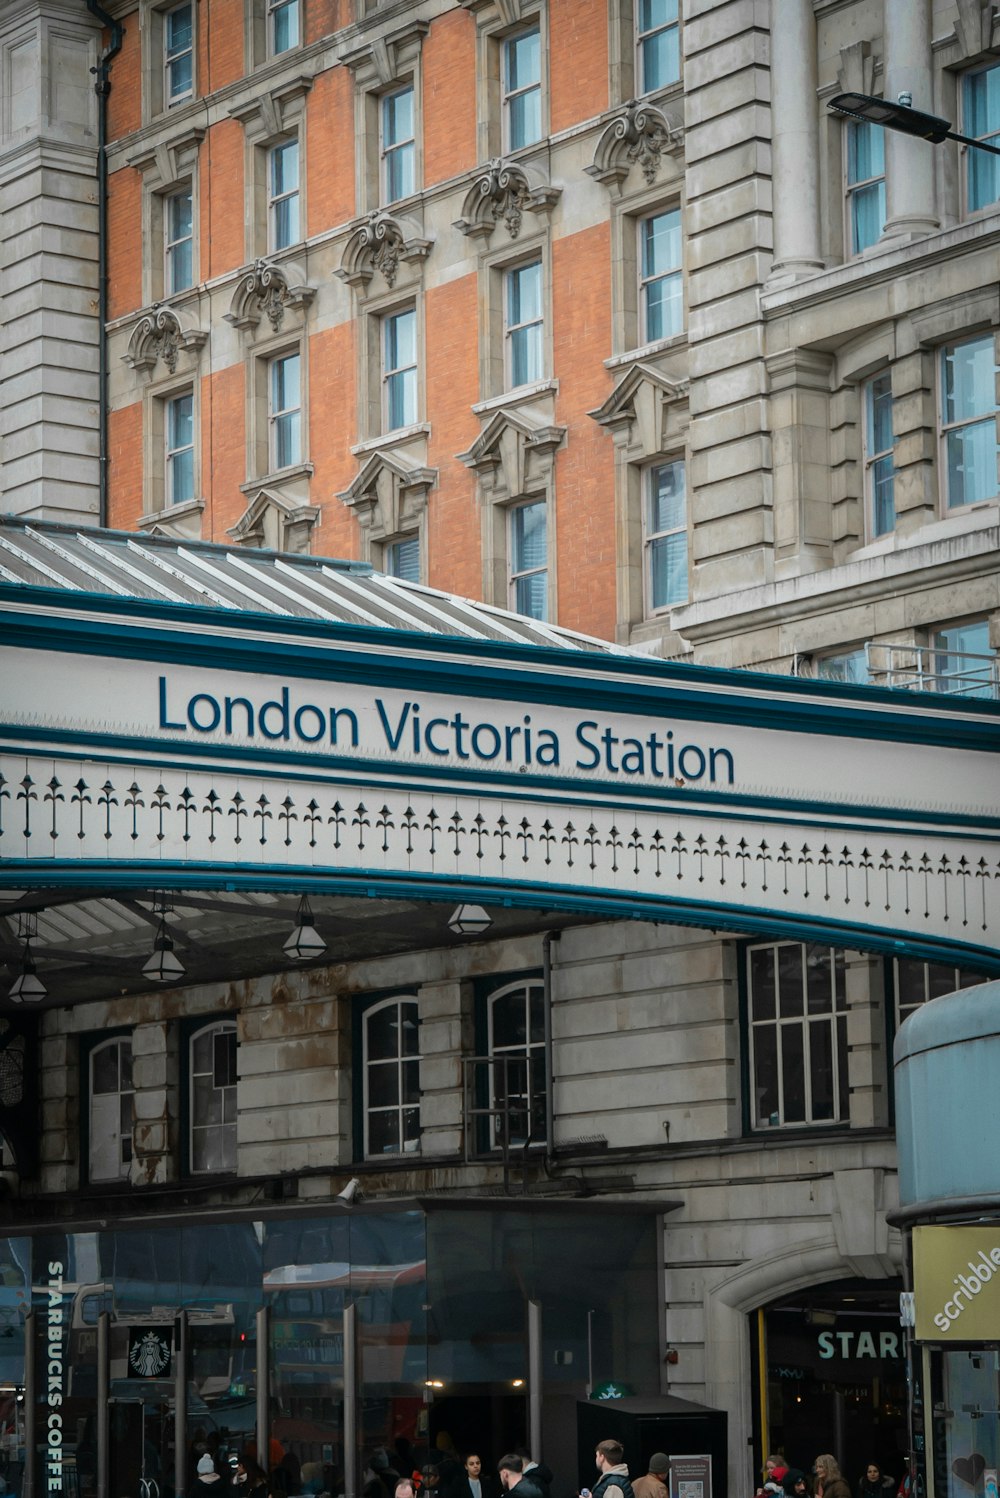 a street scene with focus on the london victoria station